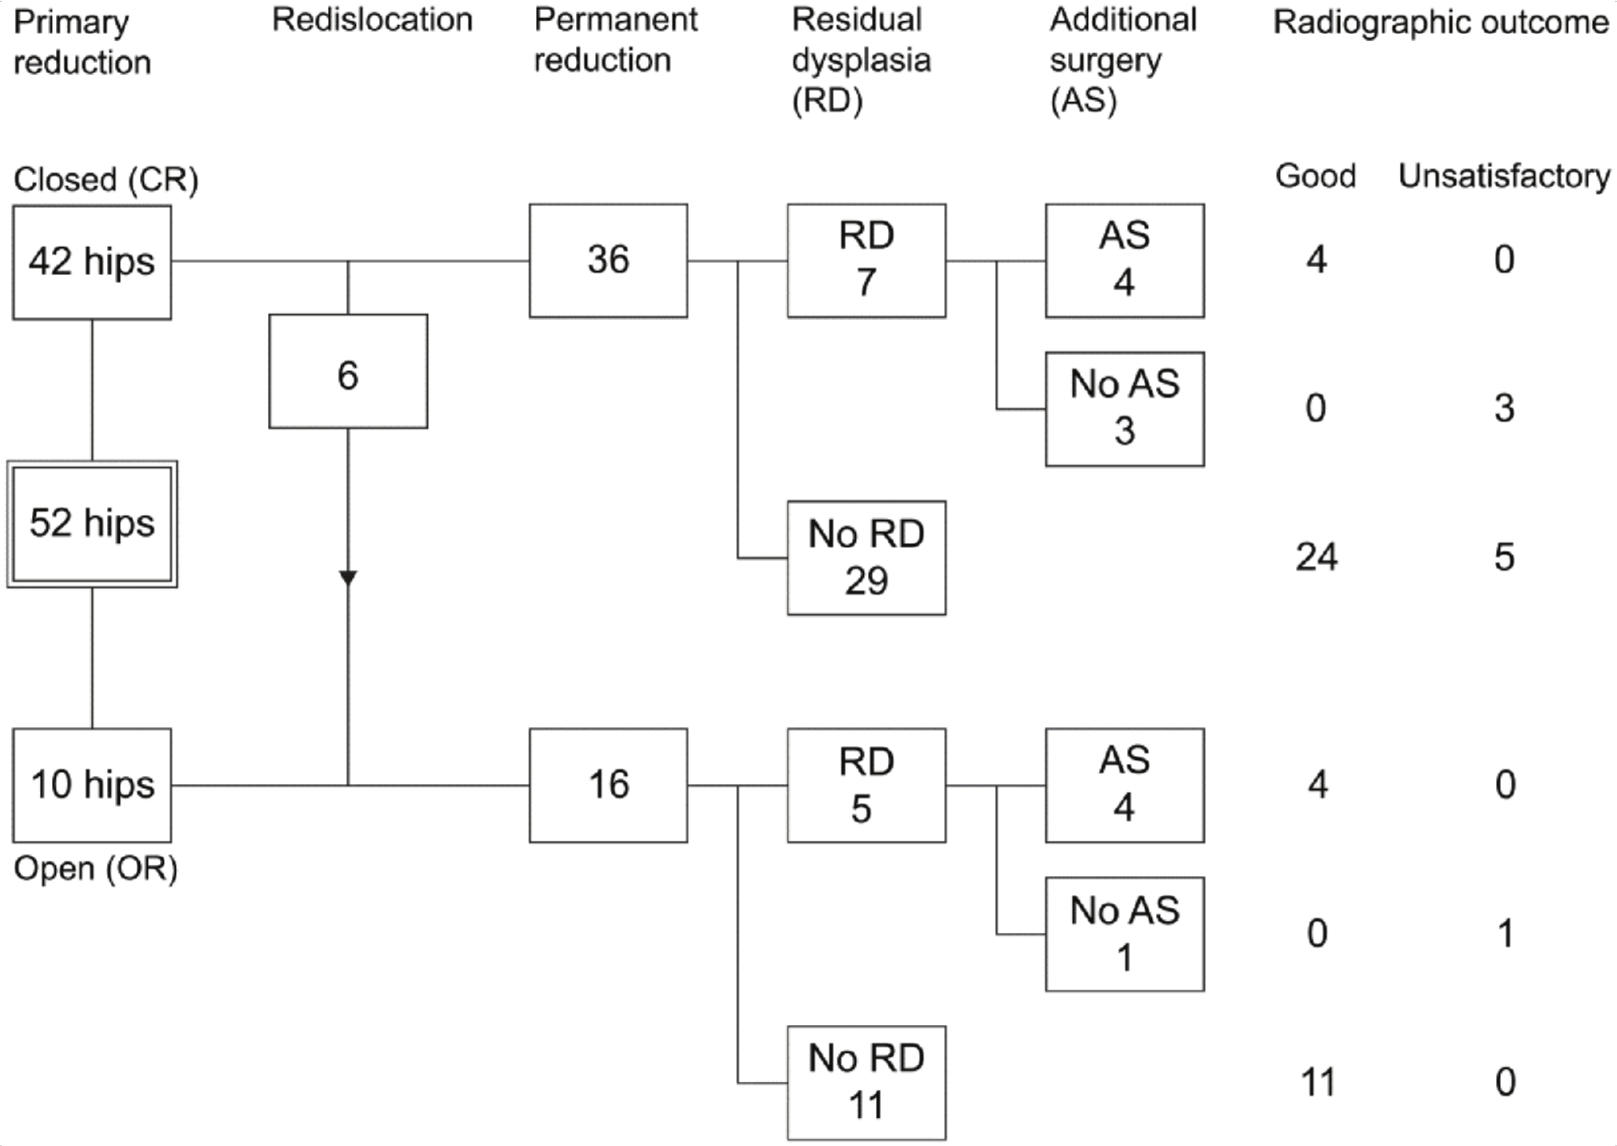 Figure 1 
          Flowchart of 52 hips with late-detected DDH, showing primary reduction, redislocation, permanent reduction, residual dysplasia, additional surgery, and radiological outcome at skeletal maturity.
        